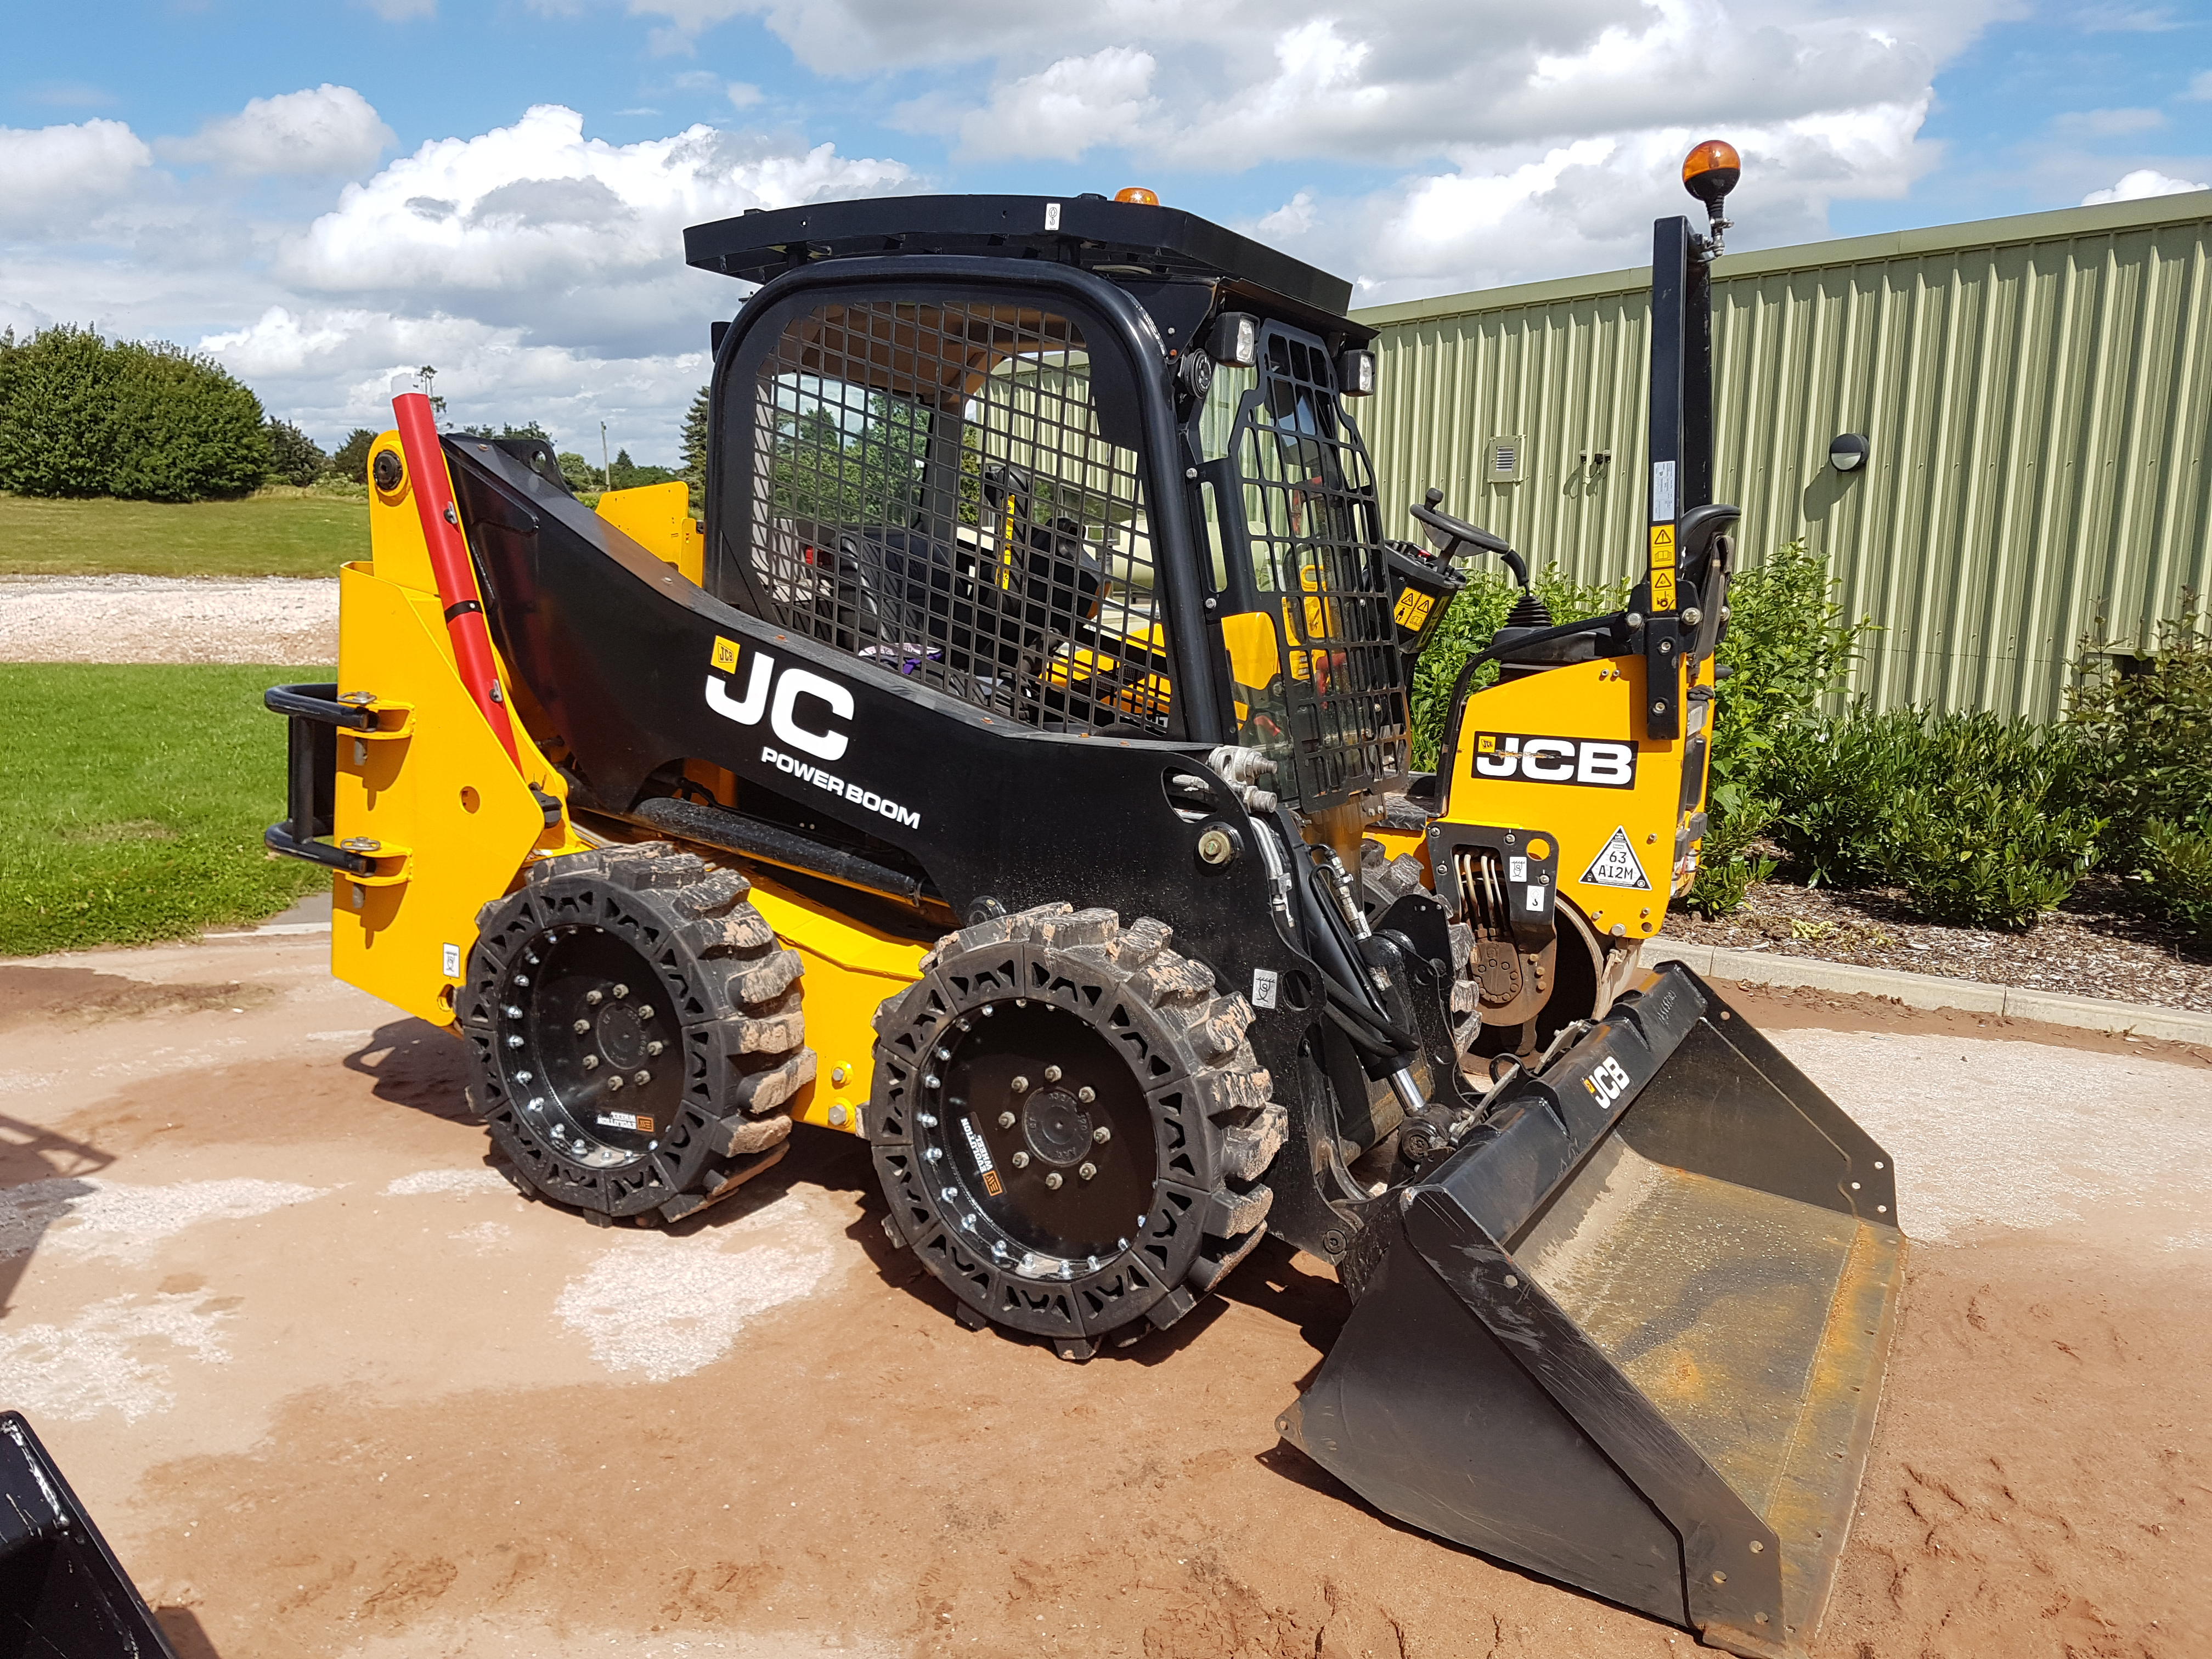 This images shows a yellow JCB Skid Steer using our all terrain skid steer tires.